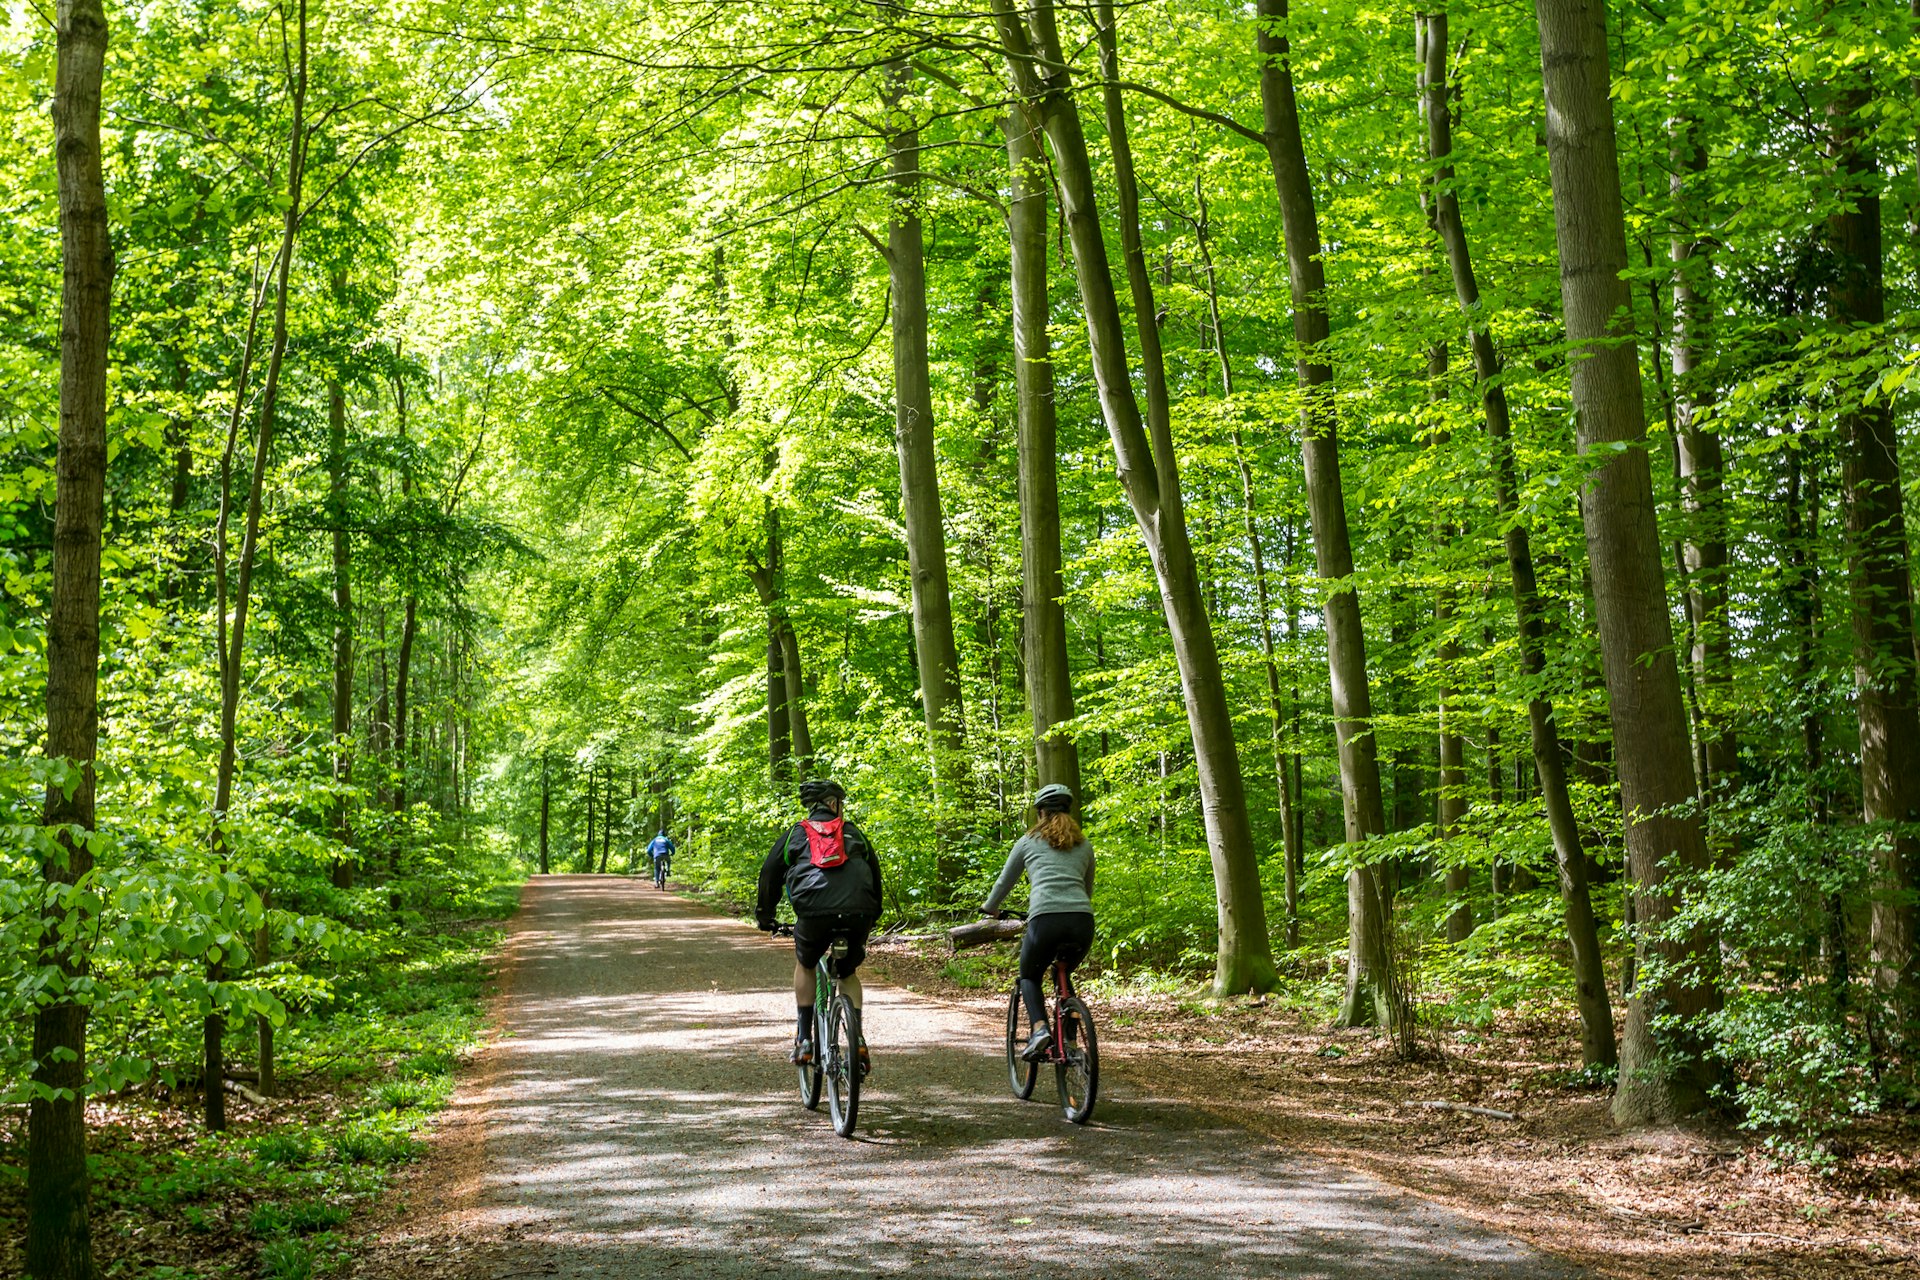 Two people cycling through a forest in Belgium in springtime